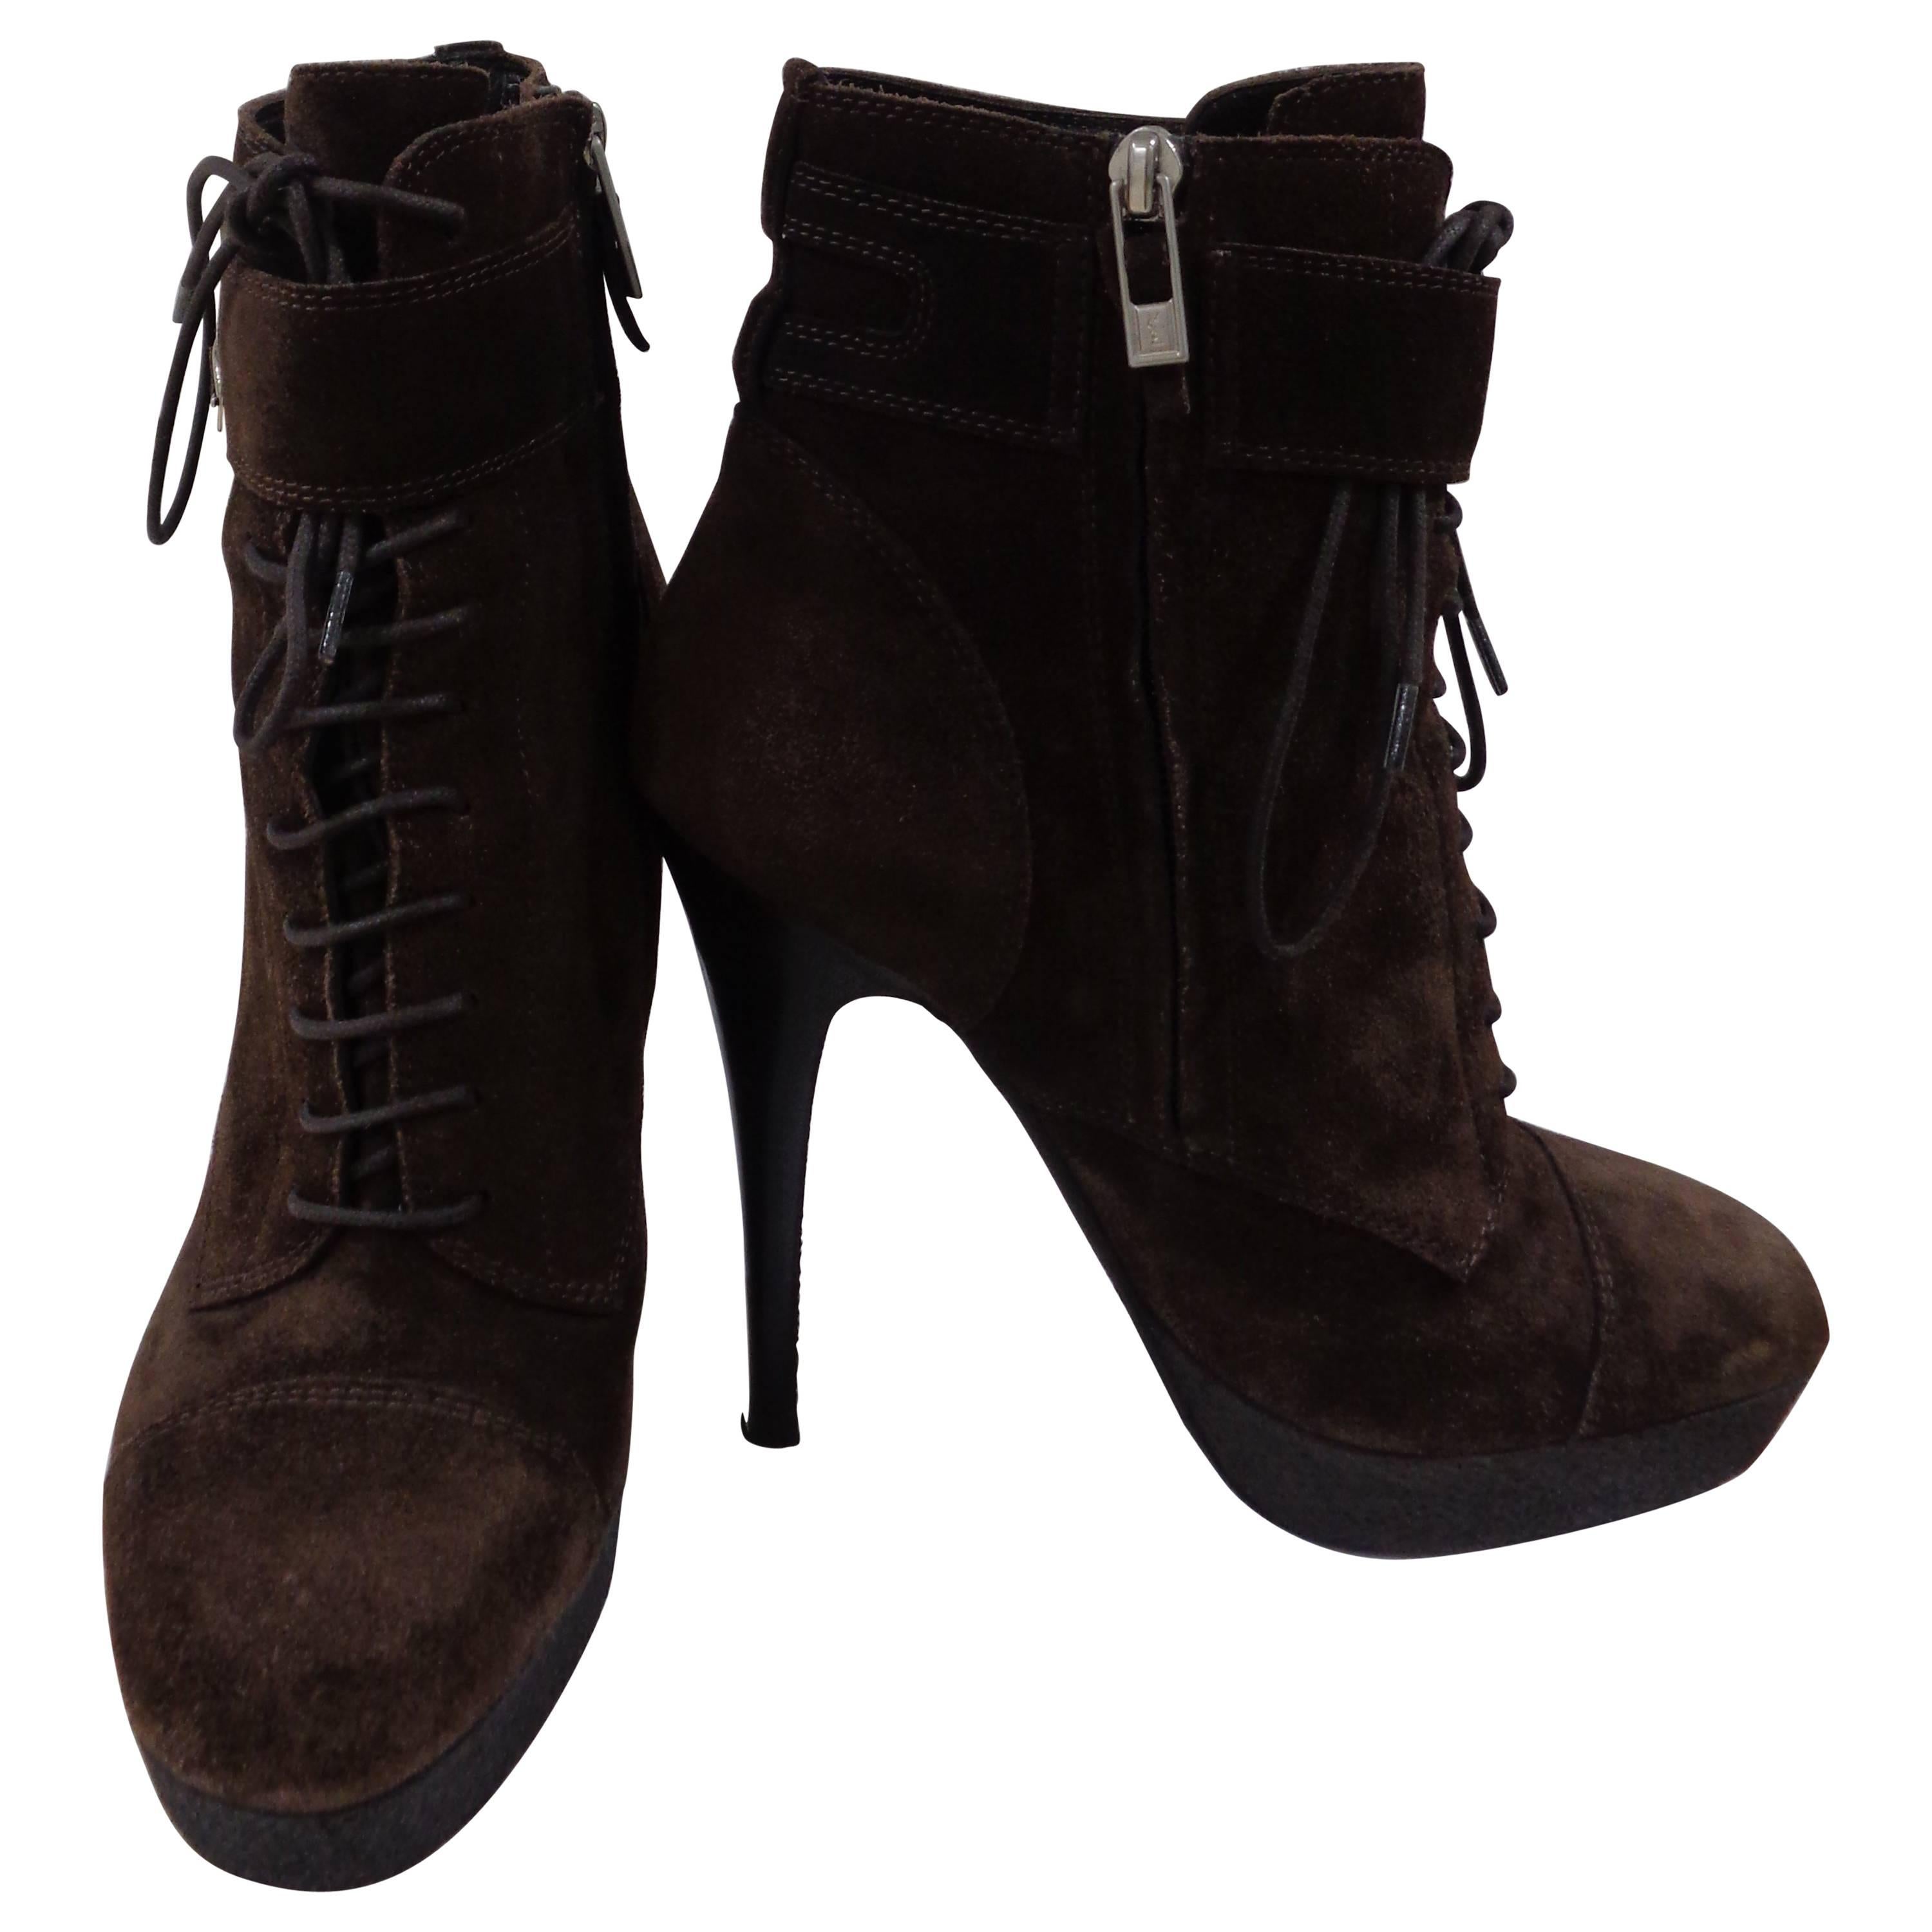 Yves Saint Laurent brown suede boots